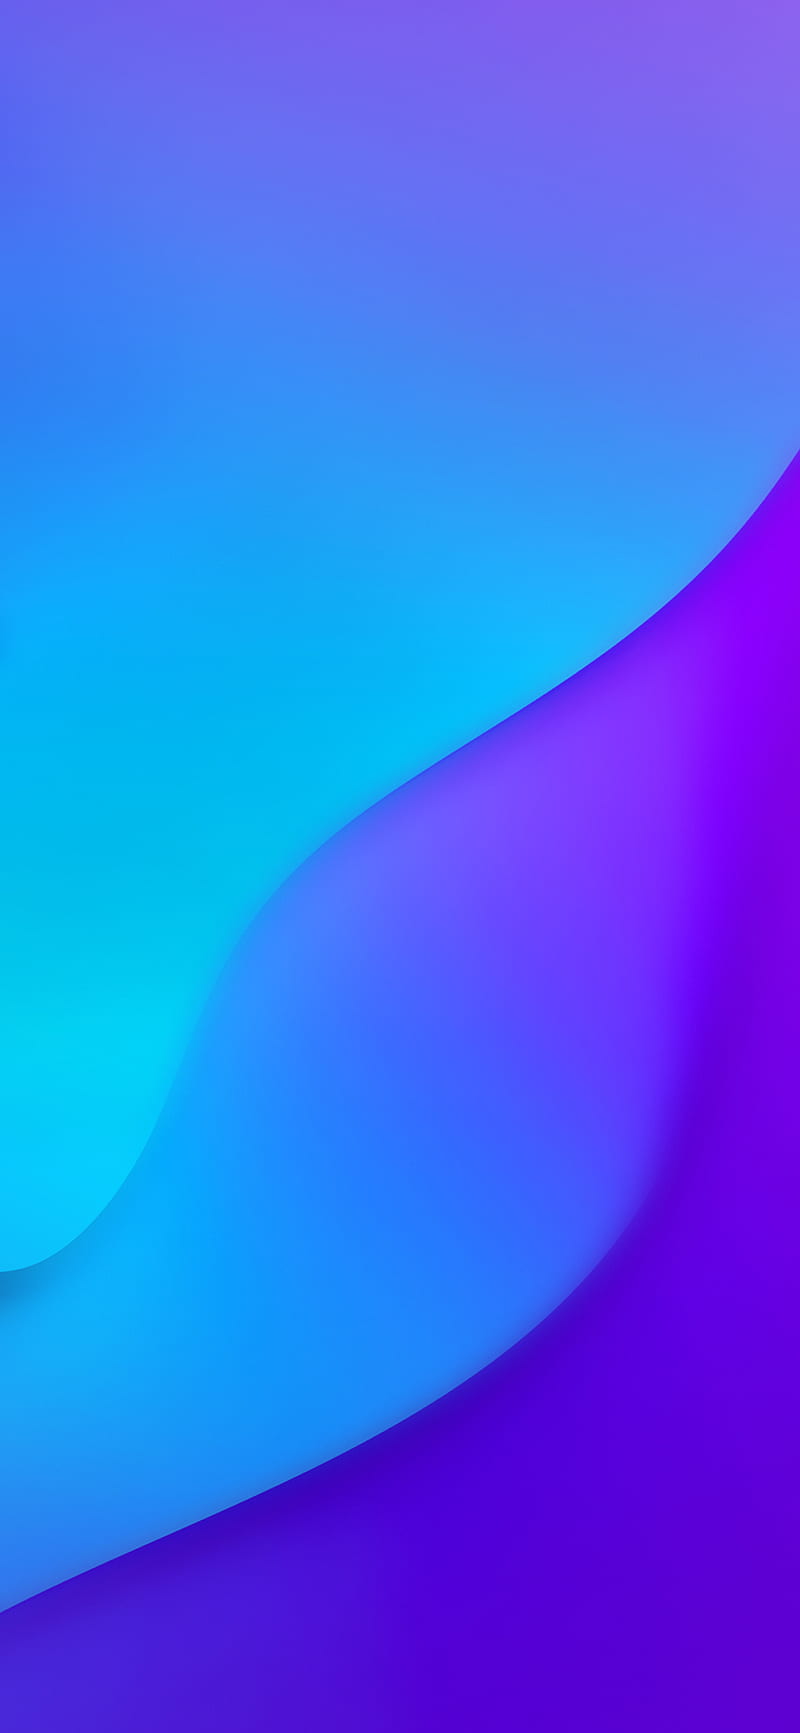 Vivo X23, vivo, x23, stoche, android, background, blue, abstract, pattern, HD phone wallpaper